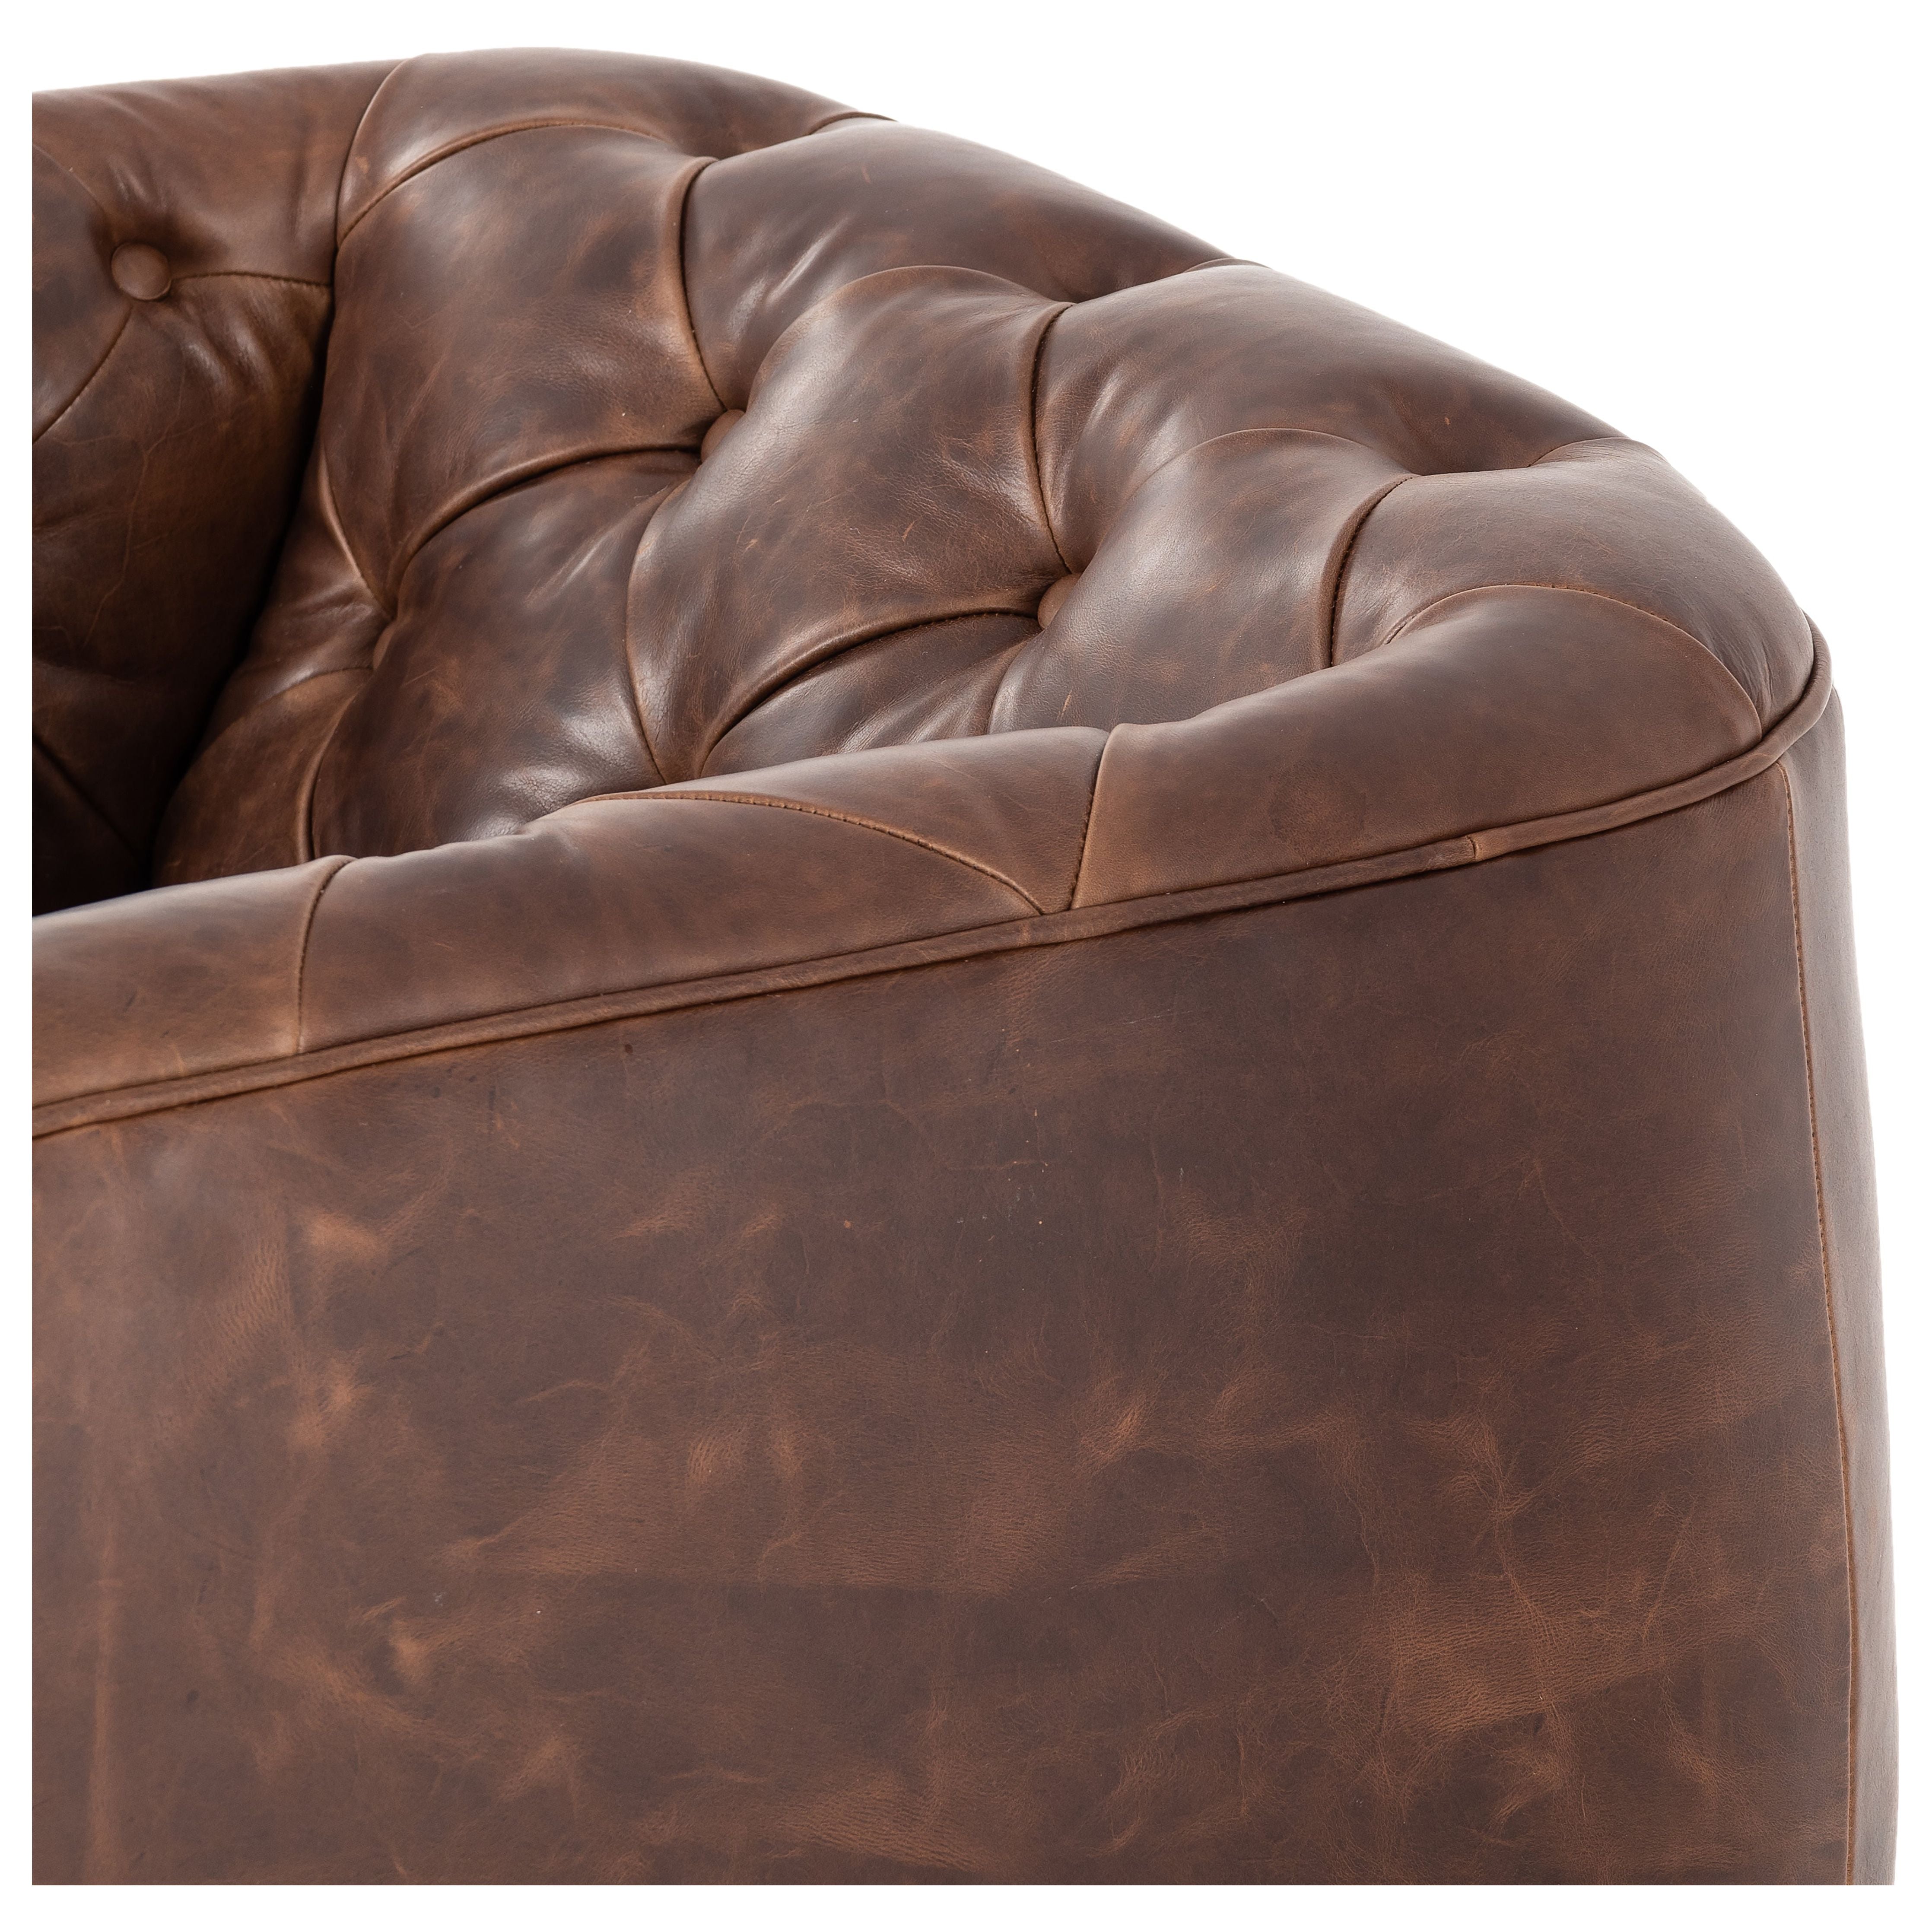 Old English-inspired top-grain leather is finished with a soft hand for a vintage, lived-in look on this traditionally inspired chair. Handcrafted in Italy, the richness of this distinctive, full-bodied leather develops an even-richer patina over time. Button tufting texturizes a comfortably curved back and sides, while a 360-degree swivel modernizes the whole look. Amethyst Home provides interior design, new construction, custom furniture, and area rugs in the Dallas metro area.